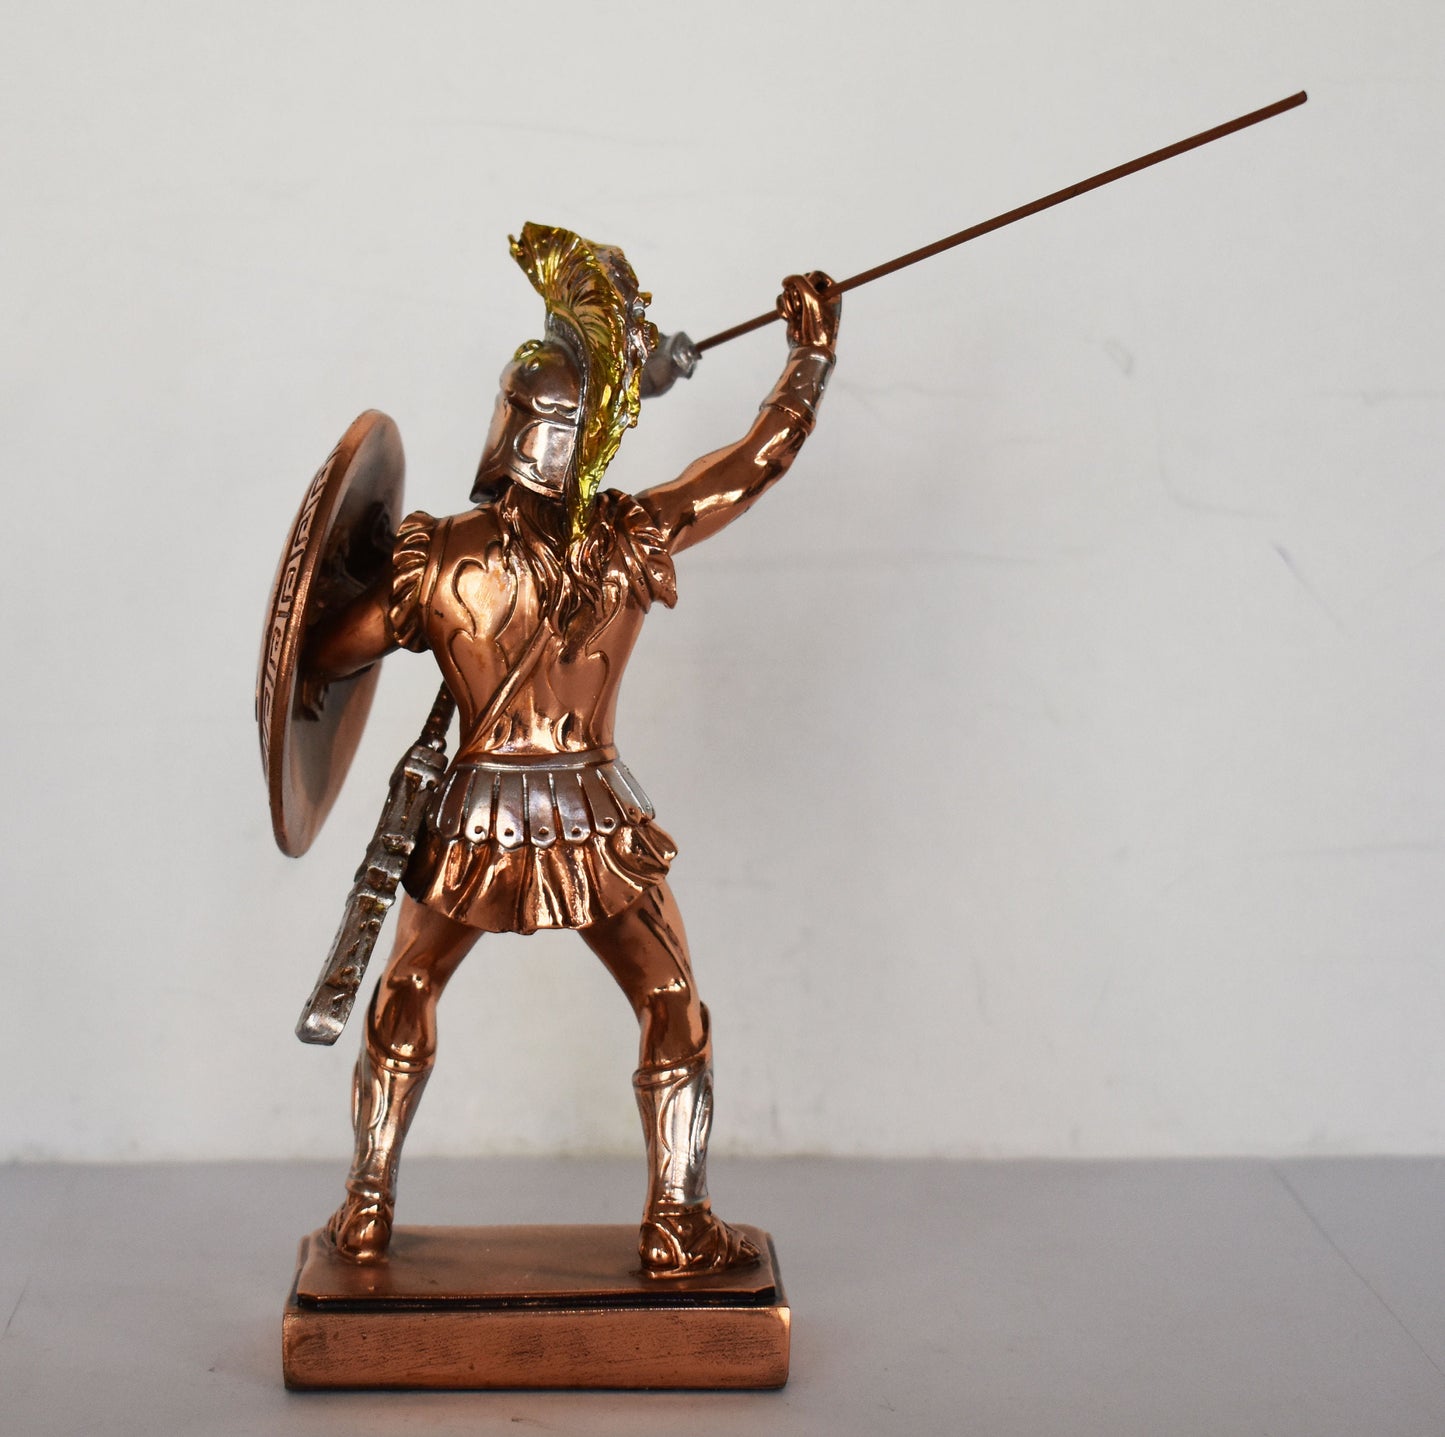 Leonidas - Spartan King - Leader of 300 - Battle of Thermopylae - 480 BC - Molon Labe, Come and Take Them - Copper Plated Alabaster